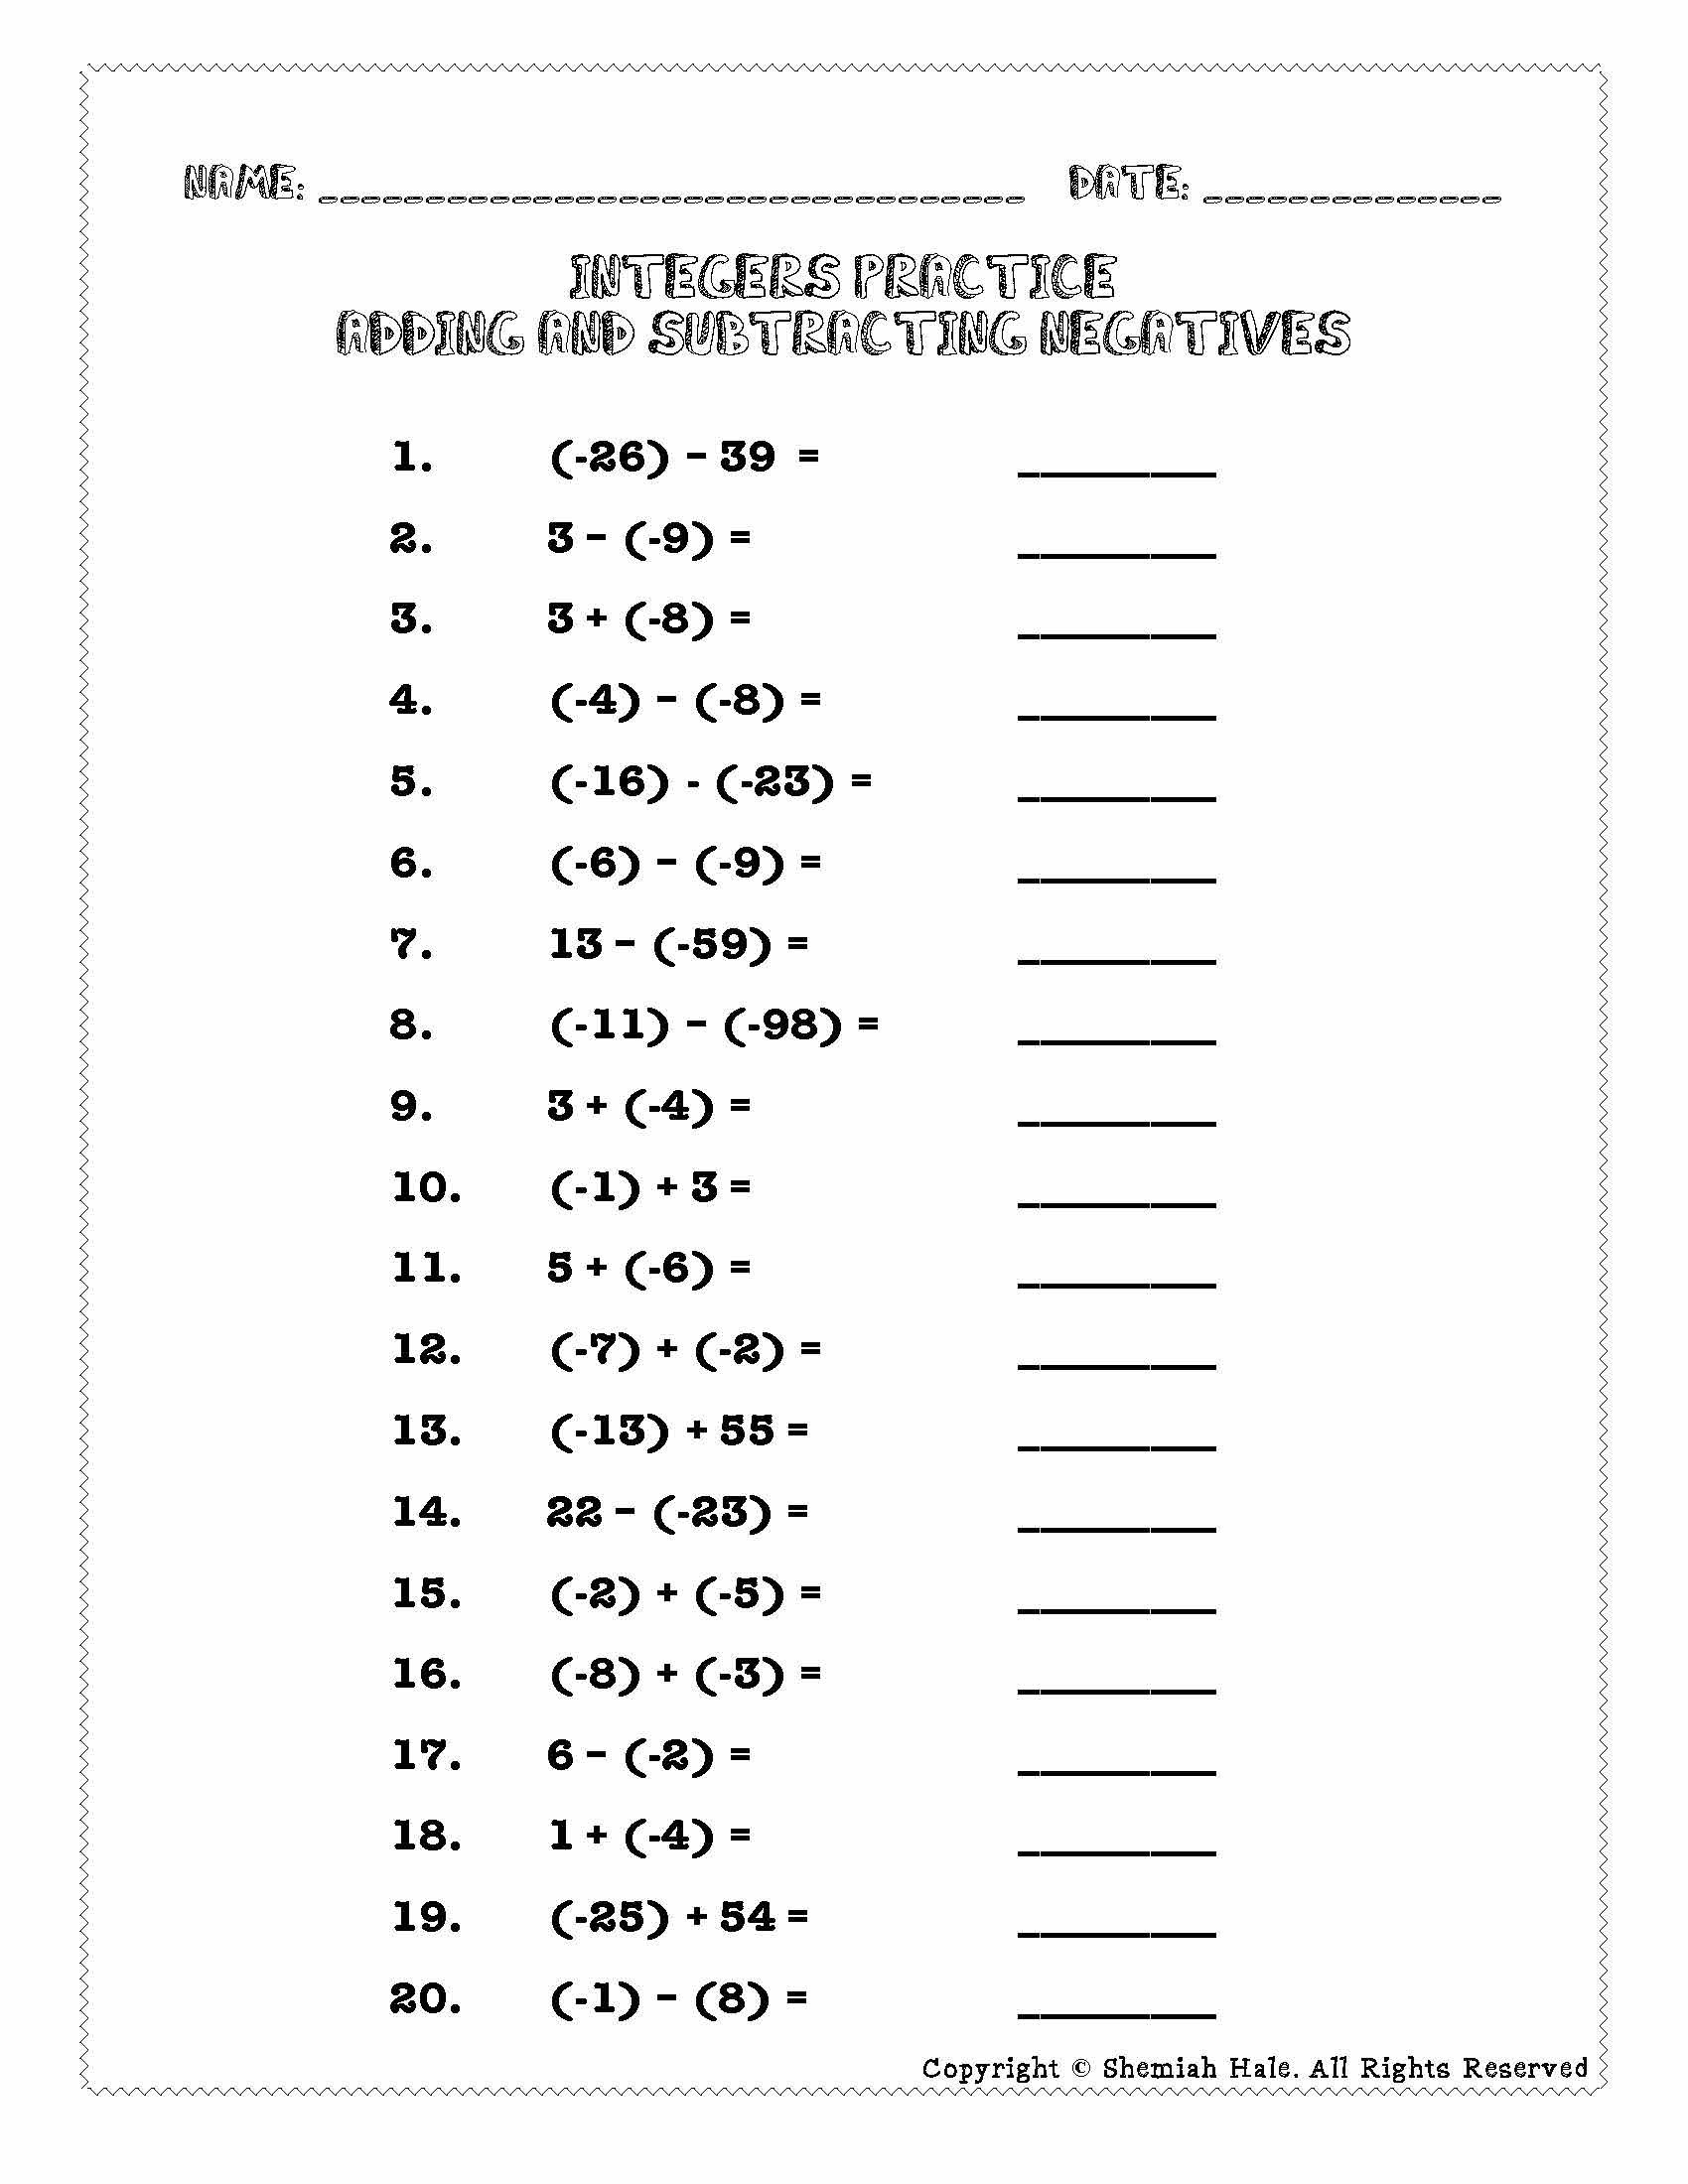 Integers Rules Number Line Notes And Practice Problems Worksheets Free Printable Integer 